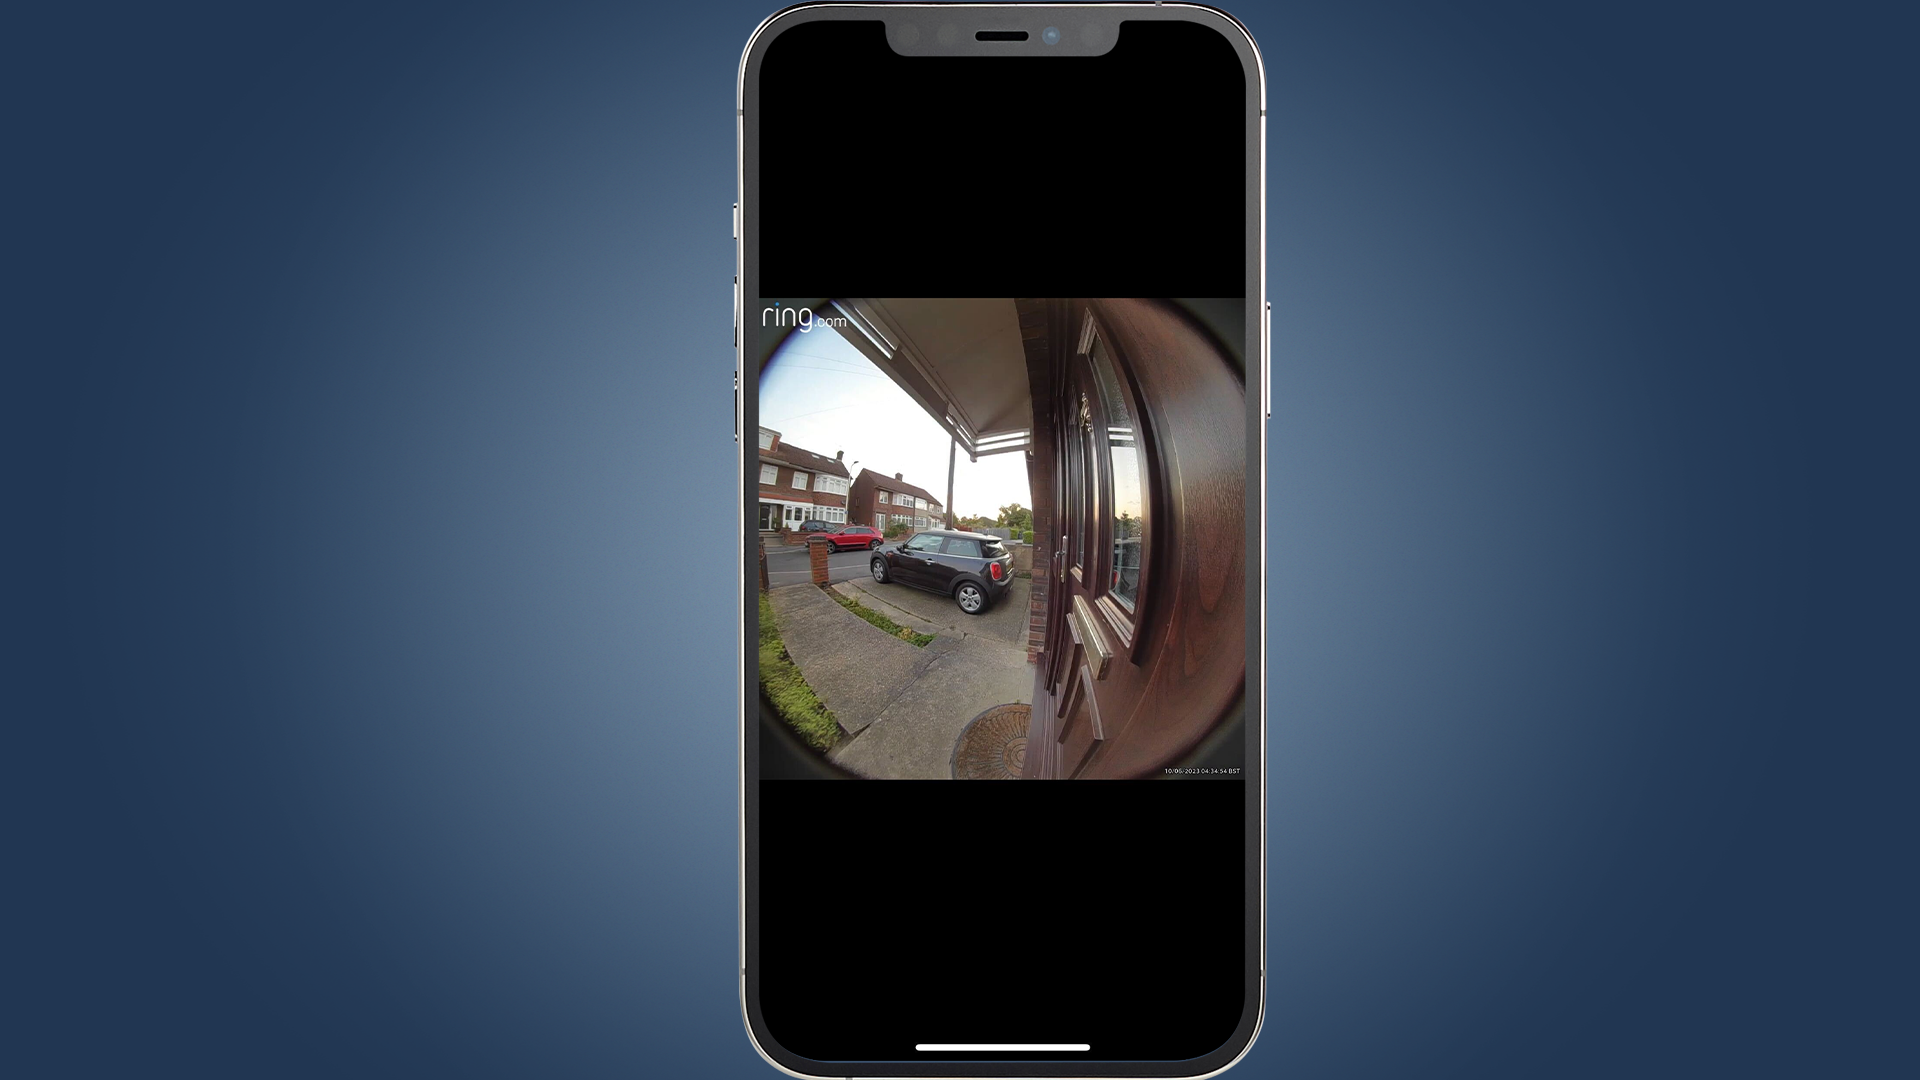 iPhone showing the Ring Video Doorbell camera interface